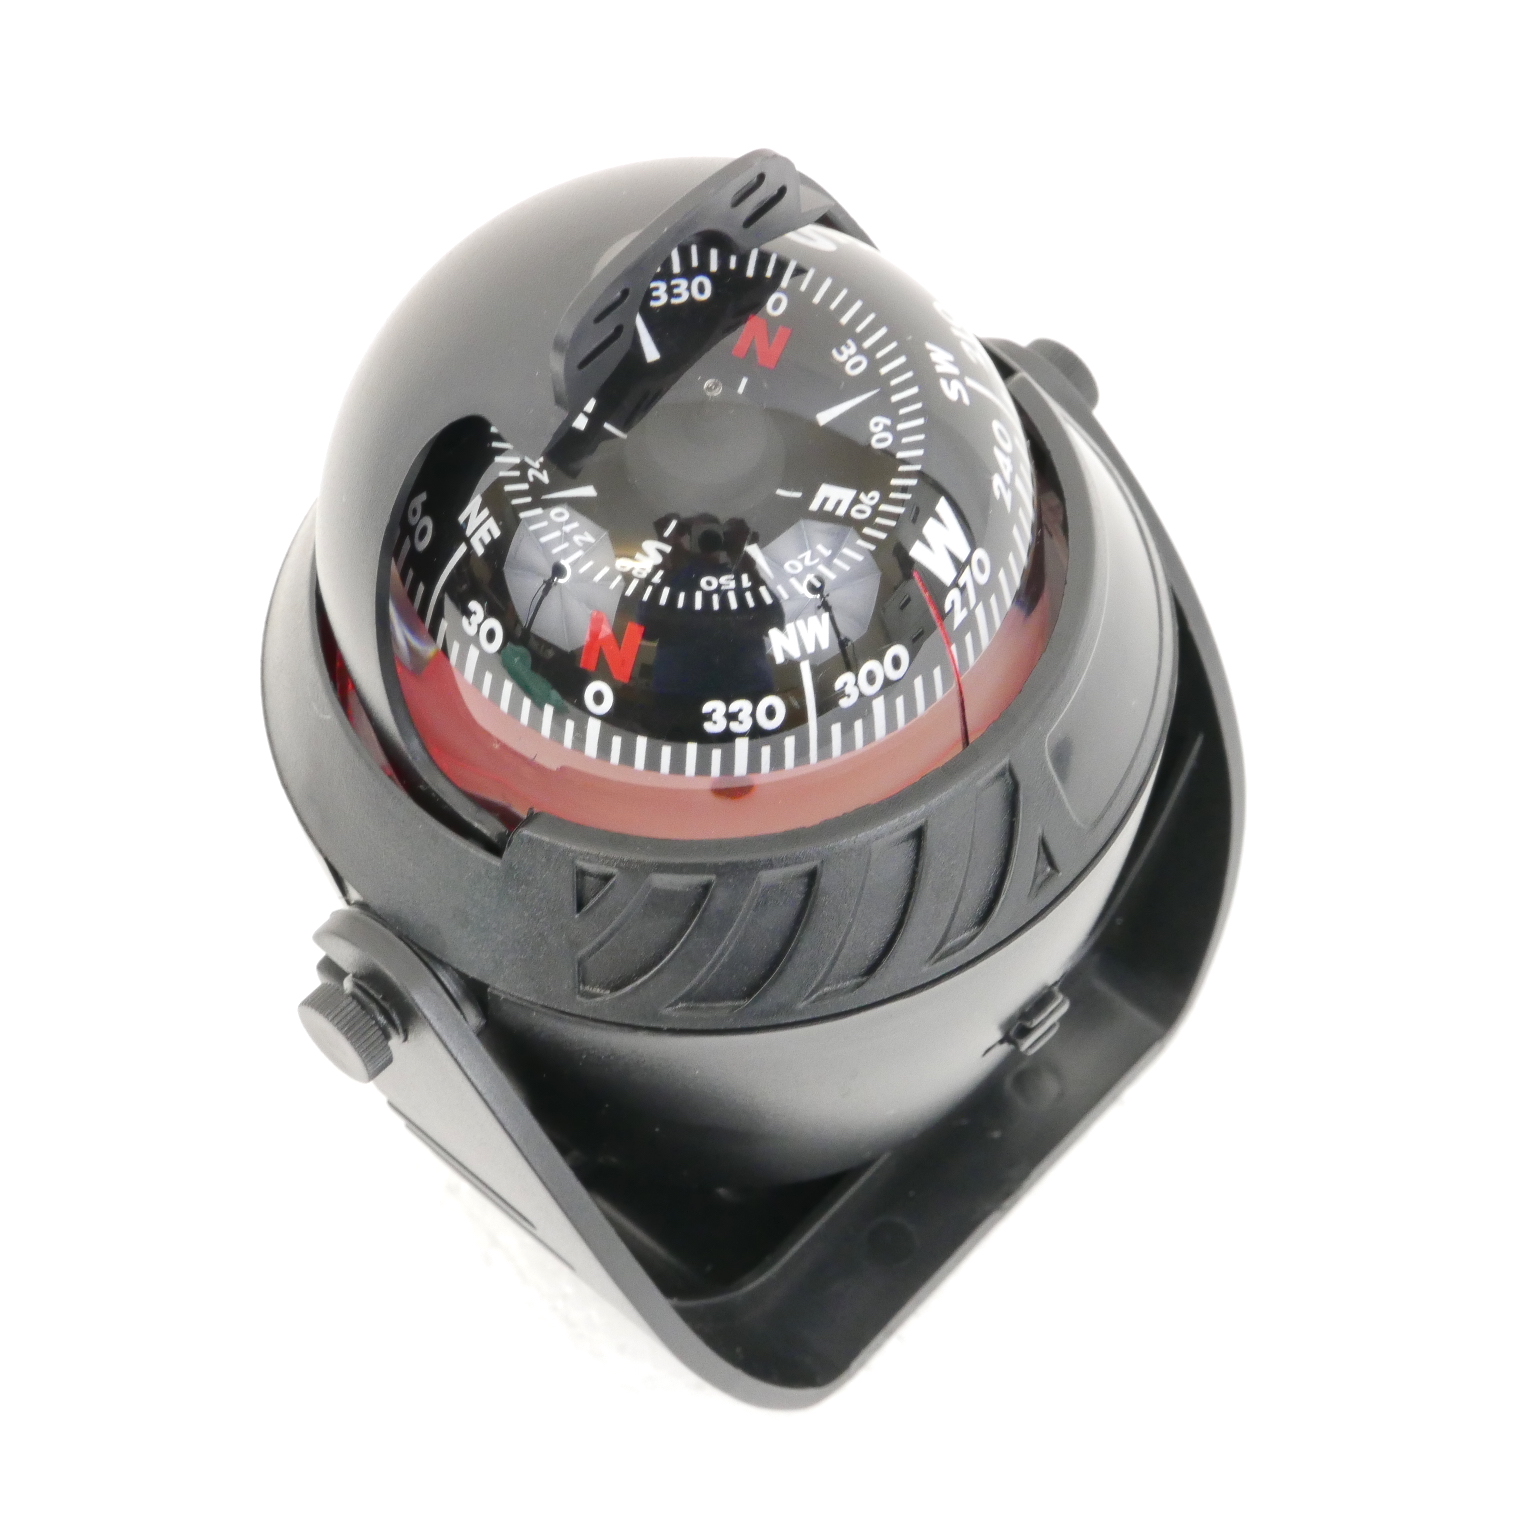 New Car Vehicle Floating Ball Magnetic Navigation Compass Black SS 